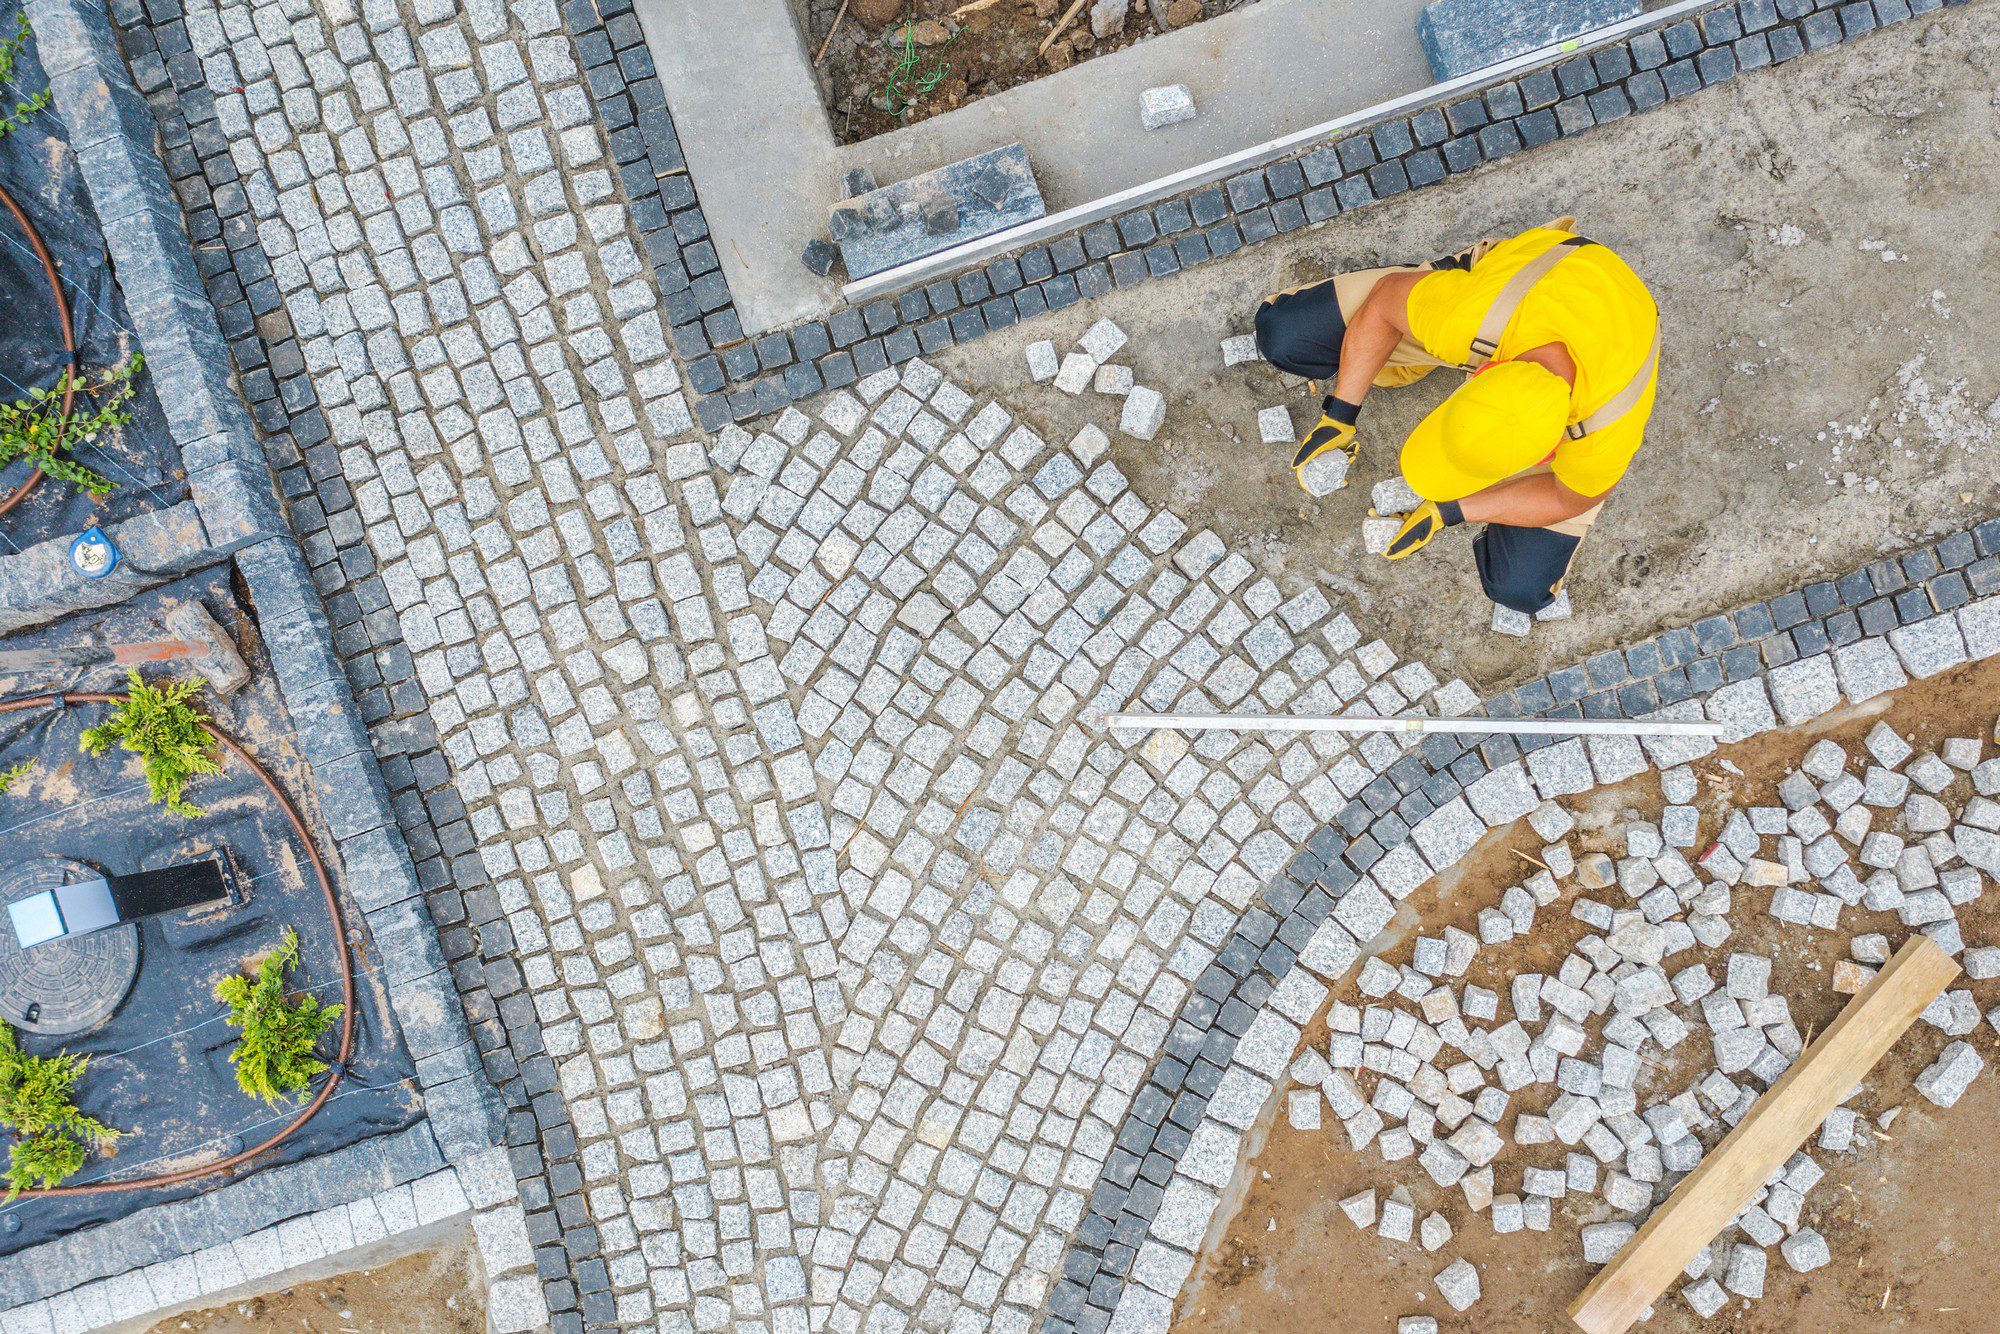 This image shows an aerial view of a person laying cobblestones to pave an area. The person is wearing a yellow high-visibility jacket and a hat, and appears to be working on a patterned section where lighter-coloured stones form a swirling design amidst regular gray stones. The surrounding area shows completed sections of pavement and an area with loose cobblestones waiting to be laid down. There's also a metal manhole cover with a bit of greenery growing around it, which indicates that this may be an urban or suburban setting. Construction materials, such as a wooden plank, can be seen around the work area. The photo gives the impression of precise, manual labour involved in creating a decorative and functional pavement.